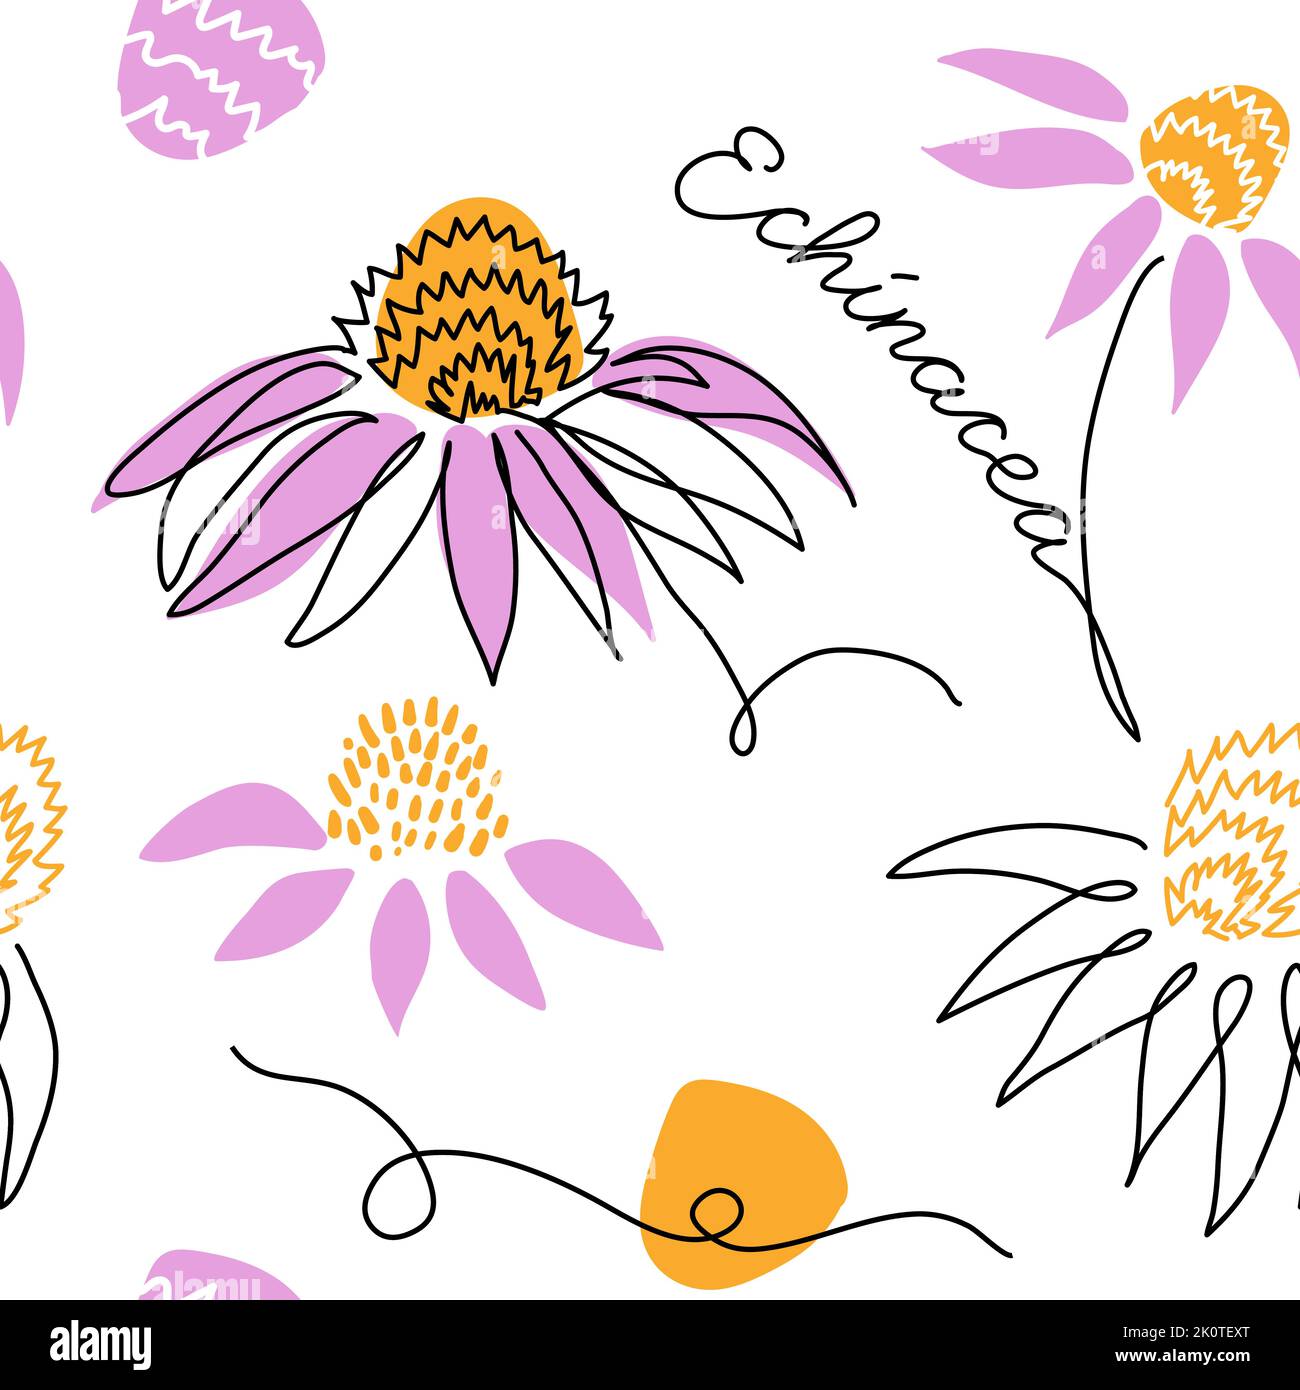 Echinacea purpurea, coneflower seamless vector pattern. One continuous line art drawing pattern with echinacea flower Stock Vector